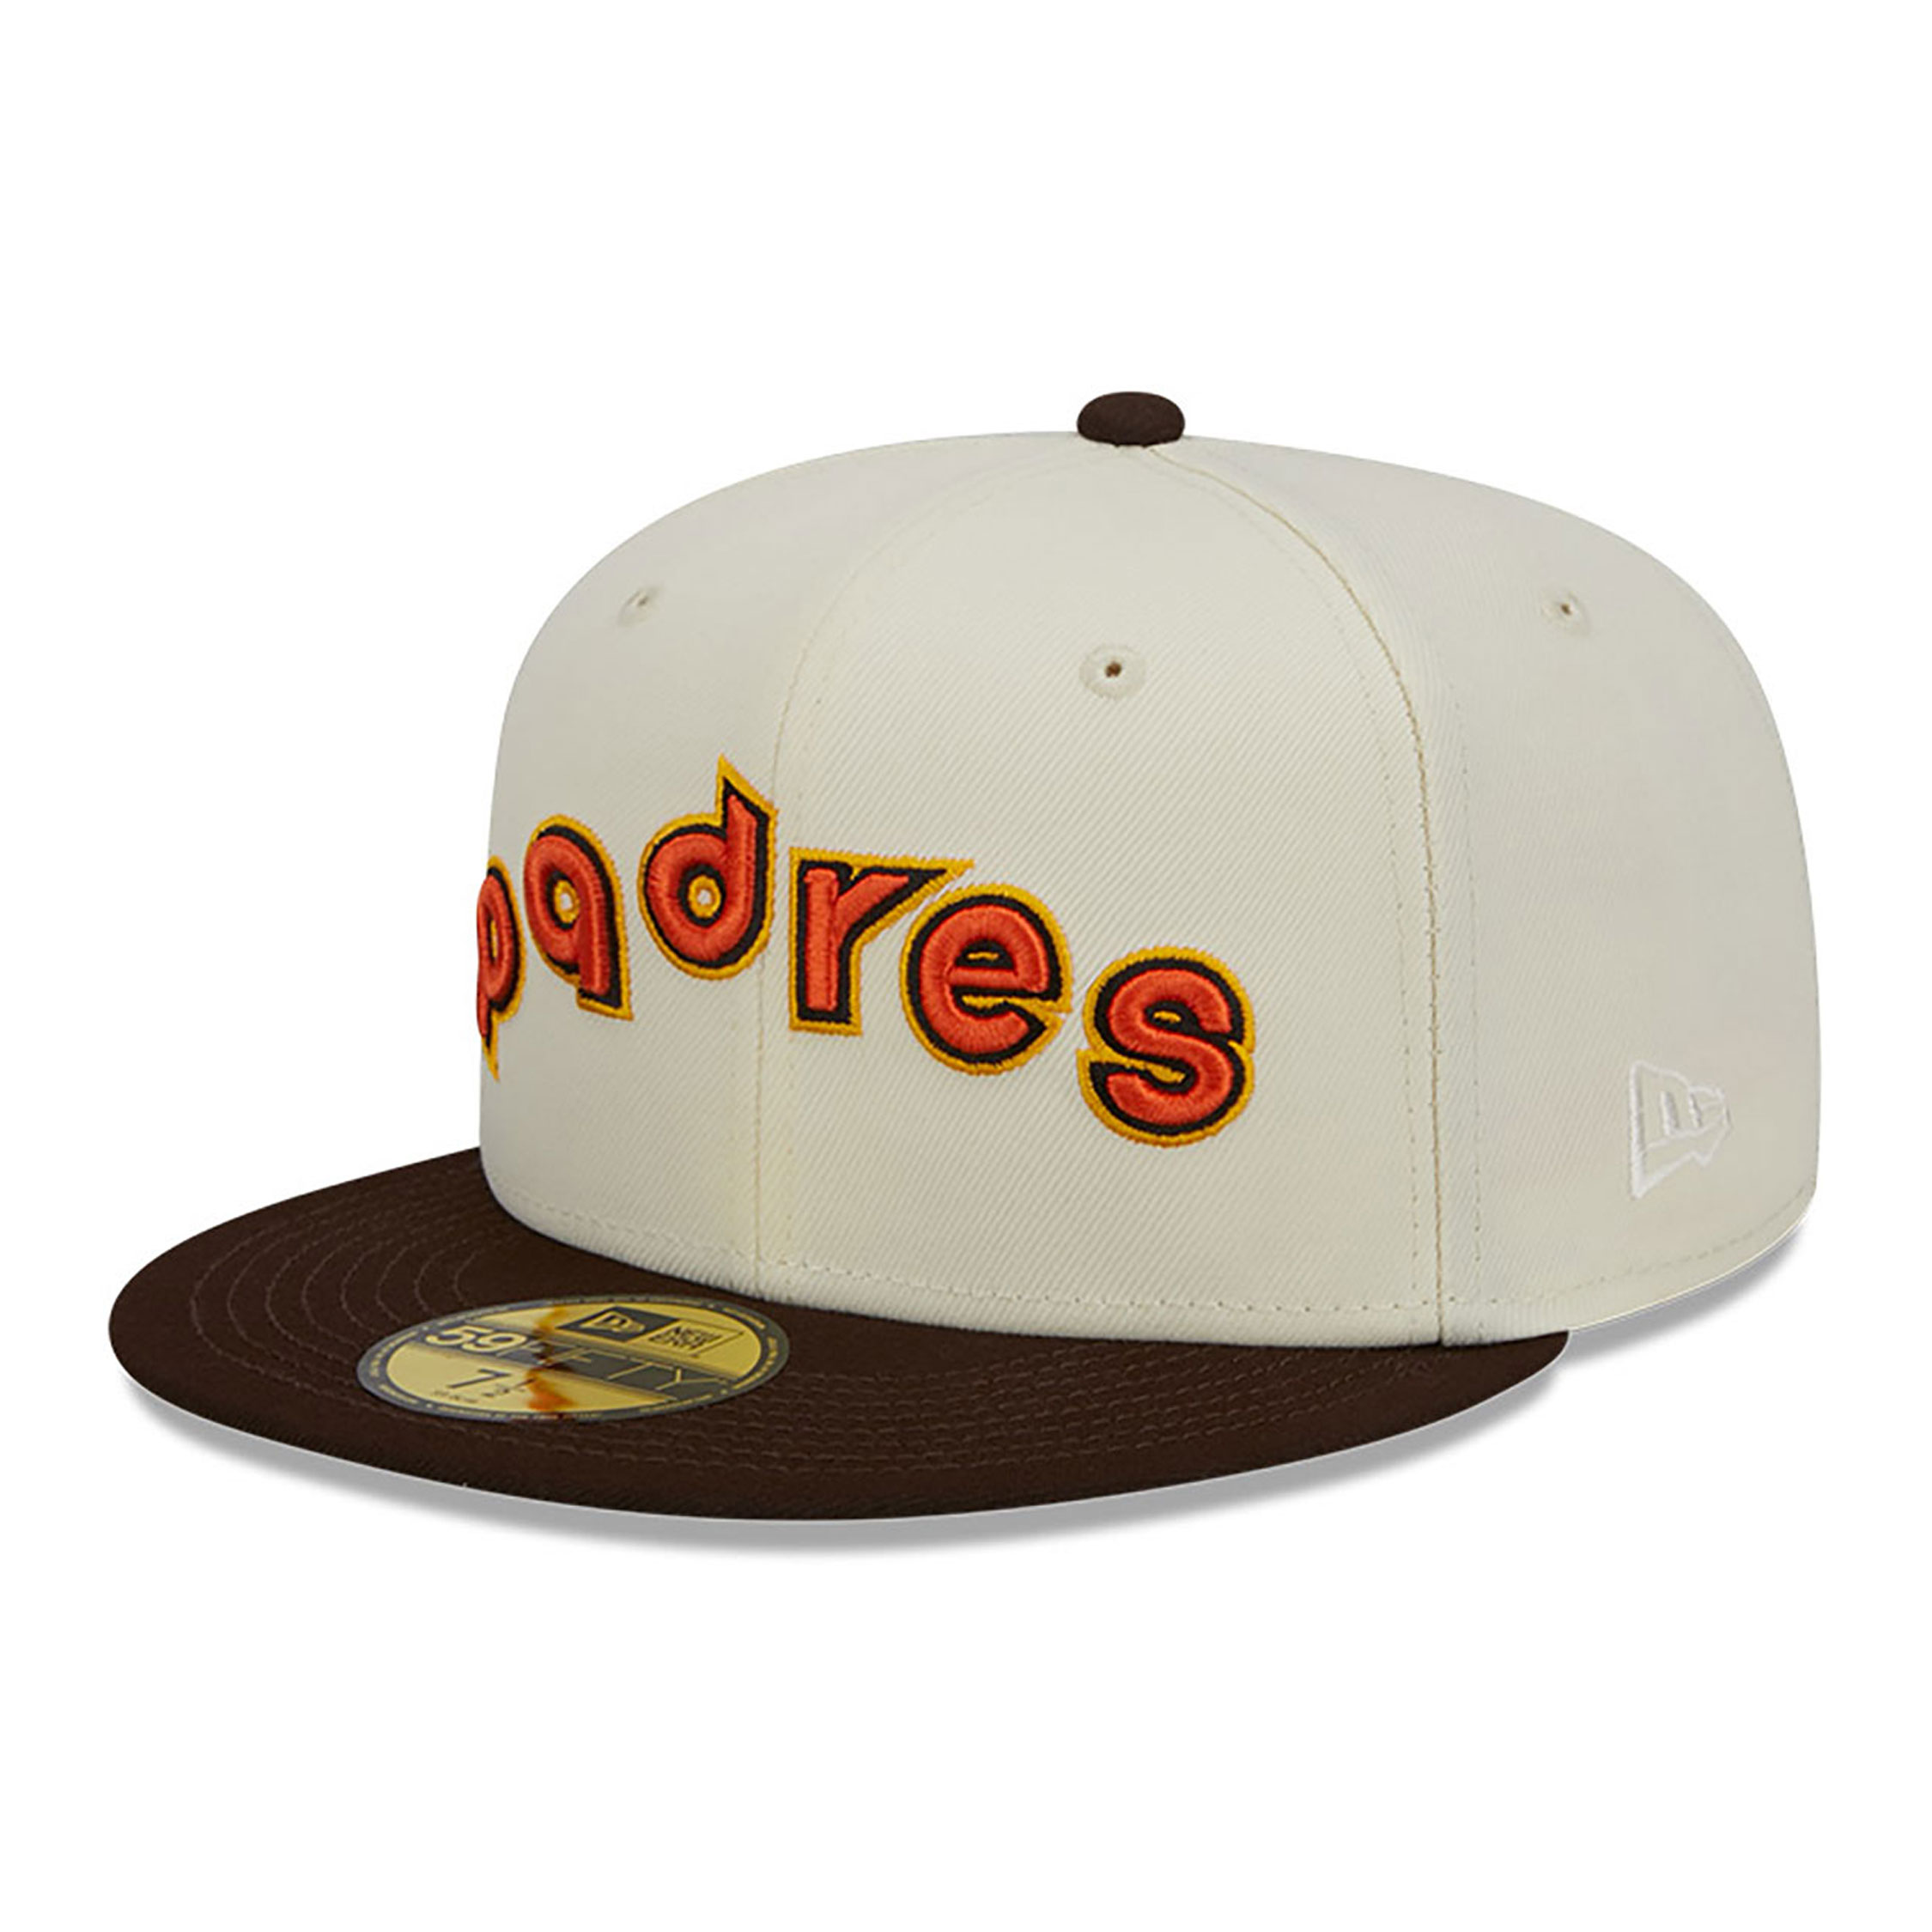 San Diego Padres Retro Jersey Script Chrome White 59FIFTY Fitted Cap